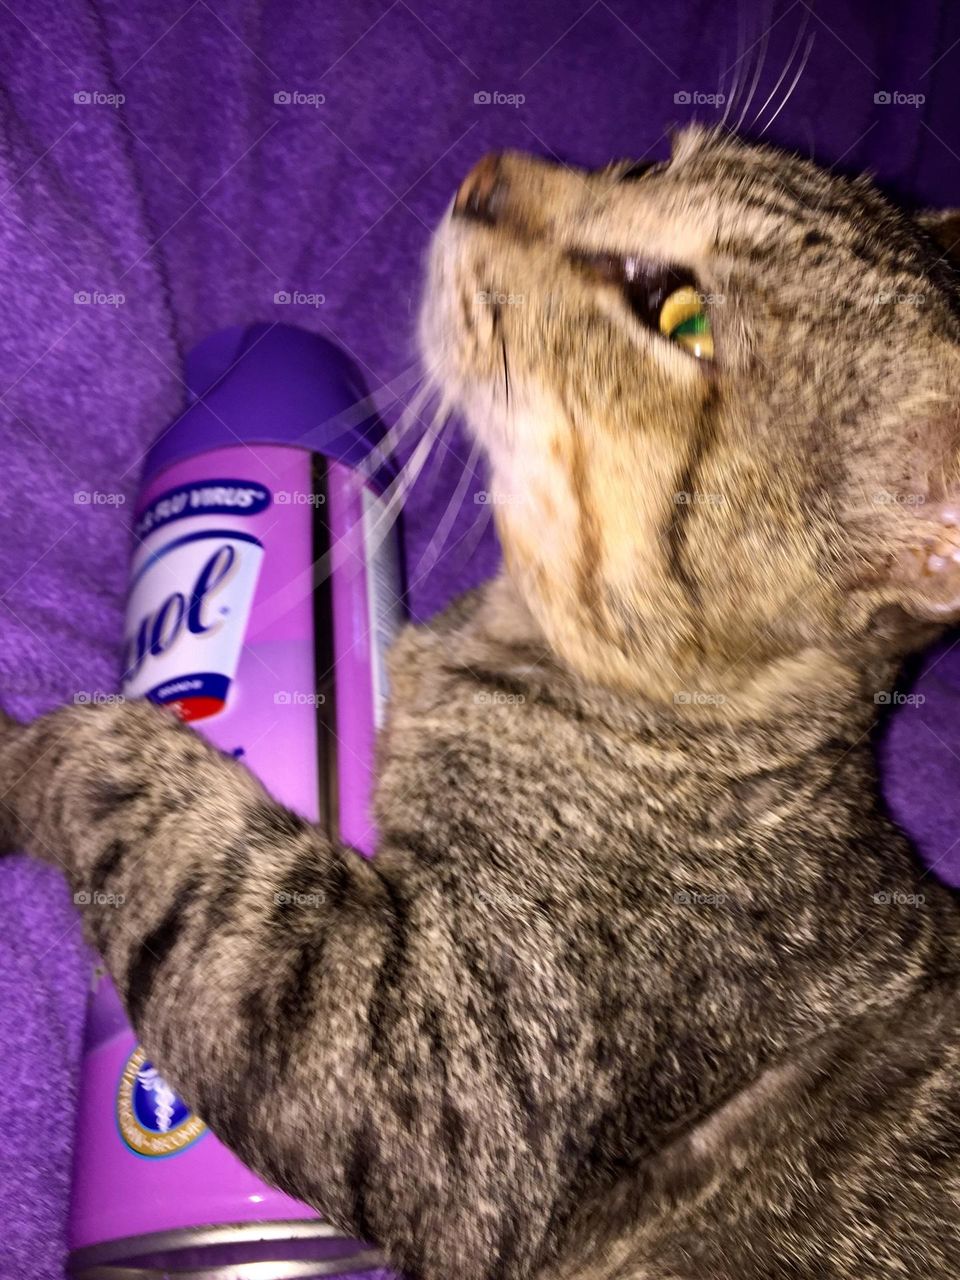 Lavender Lysol and the cat.